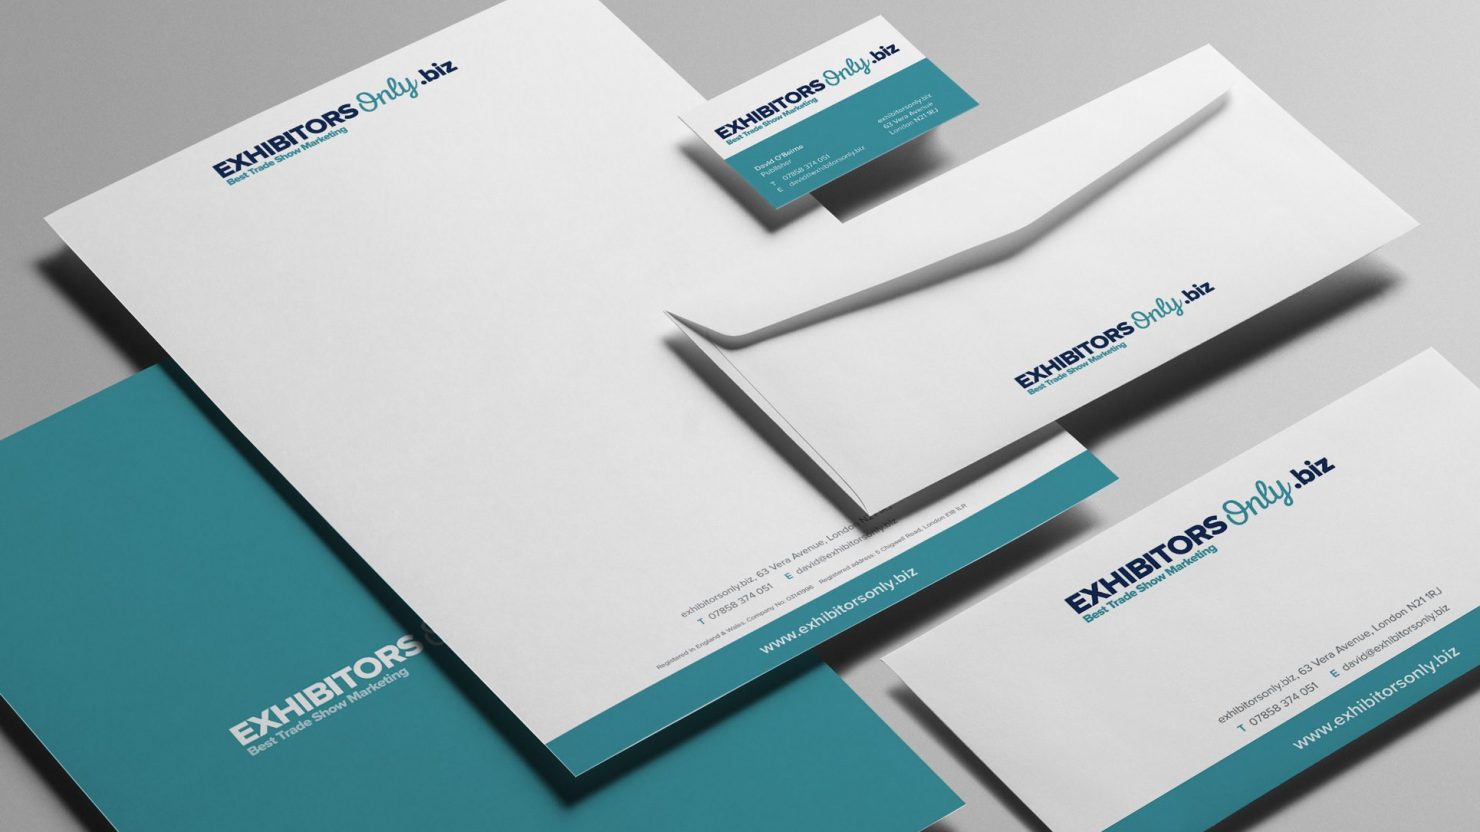 stationery graphic design for exhibitors only trade show marketing